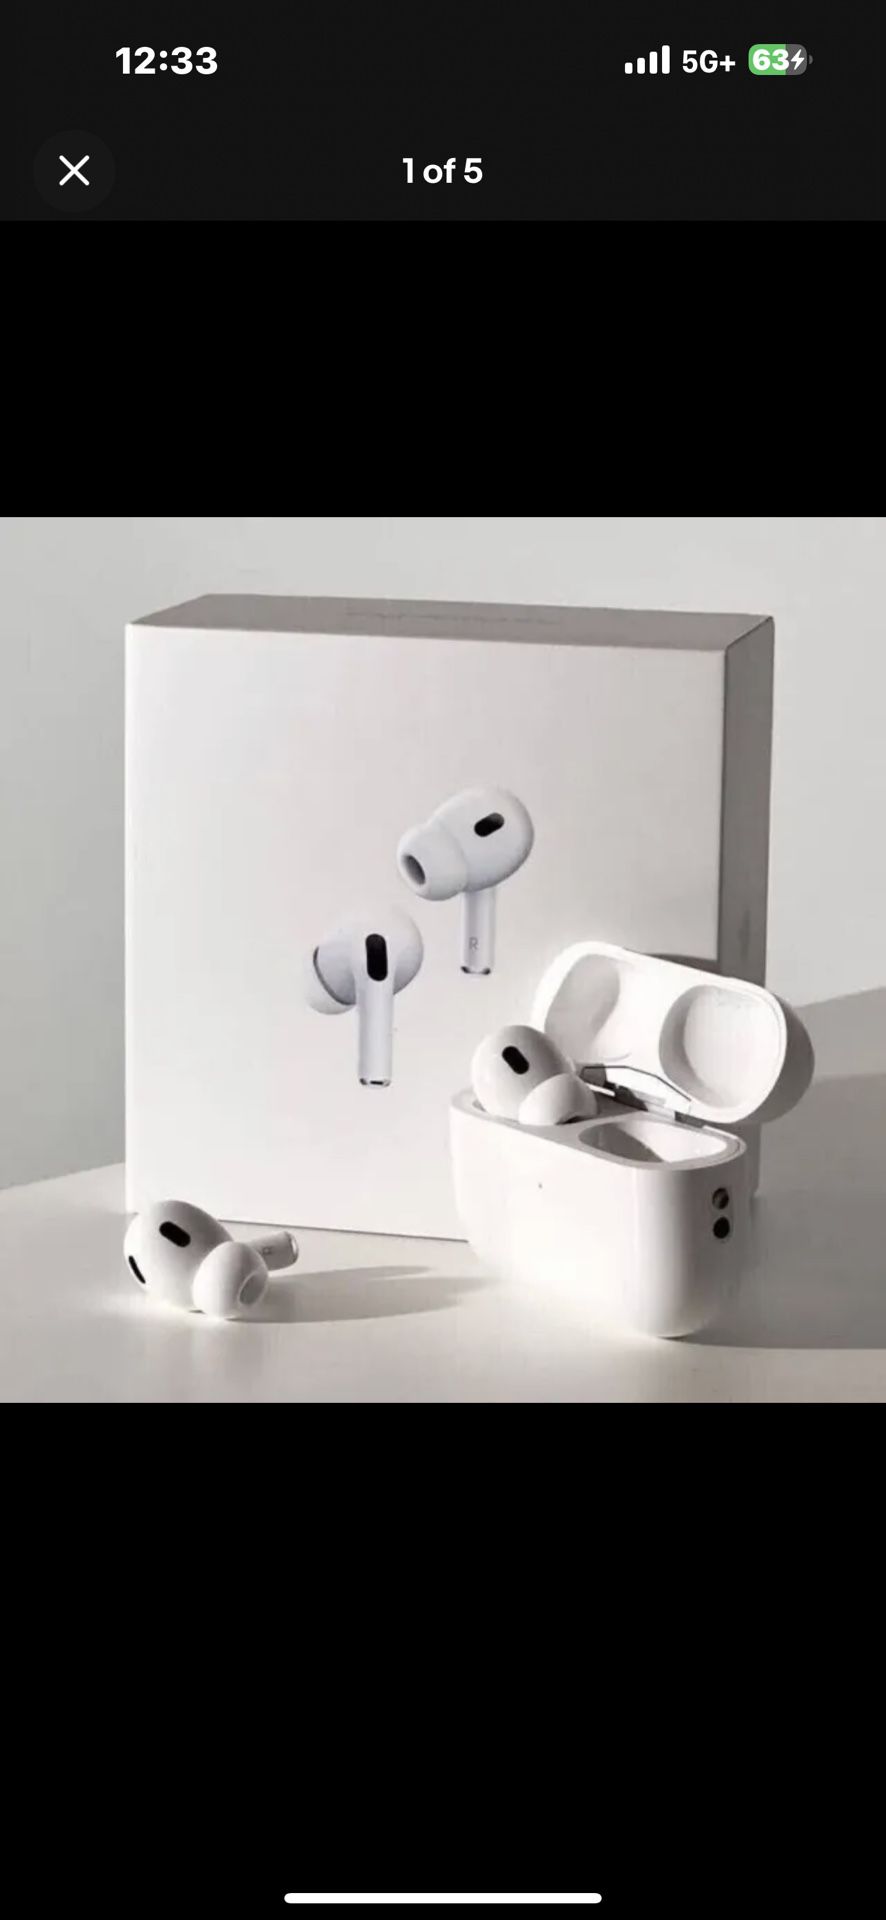 Brand New AirPods Pro 2nd Generation with Wireless Charging Case